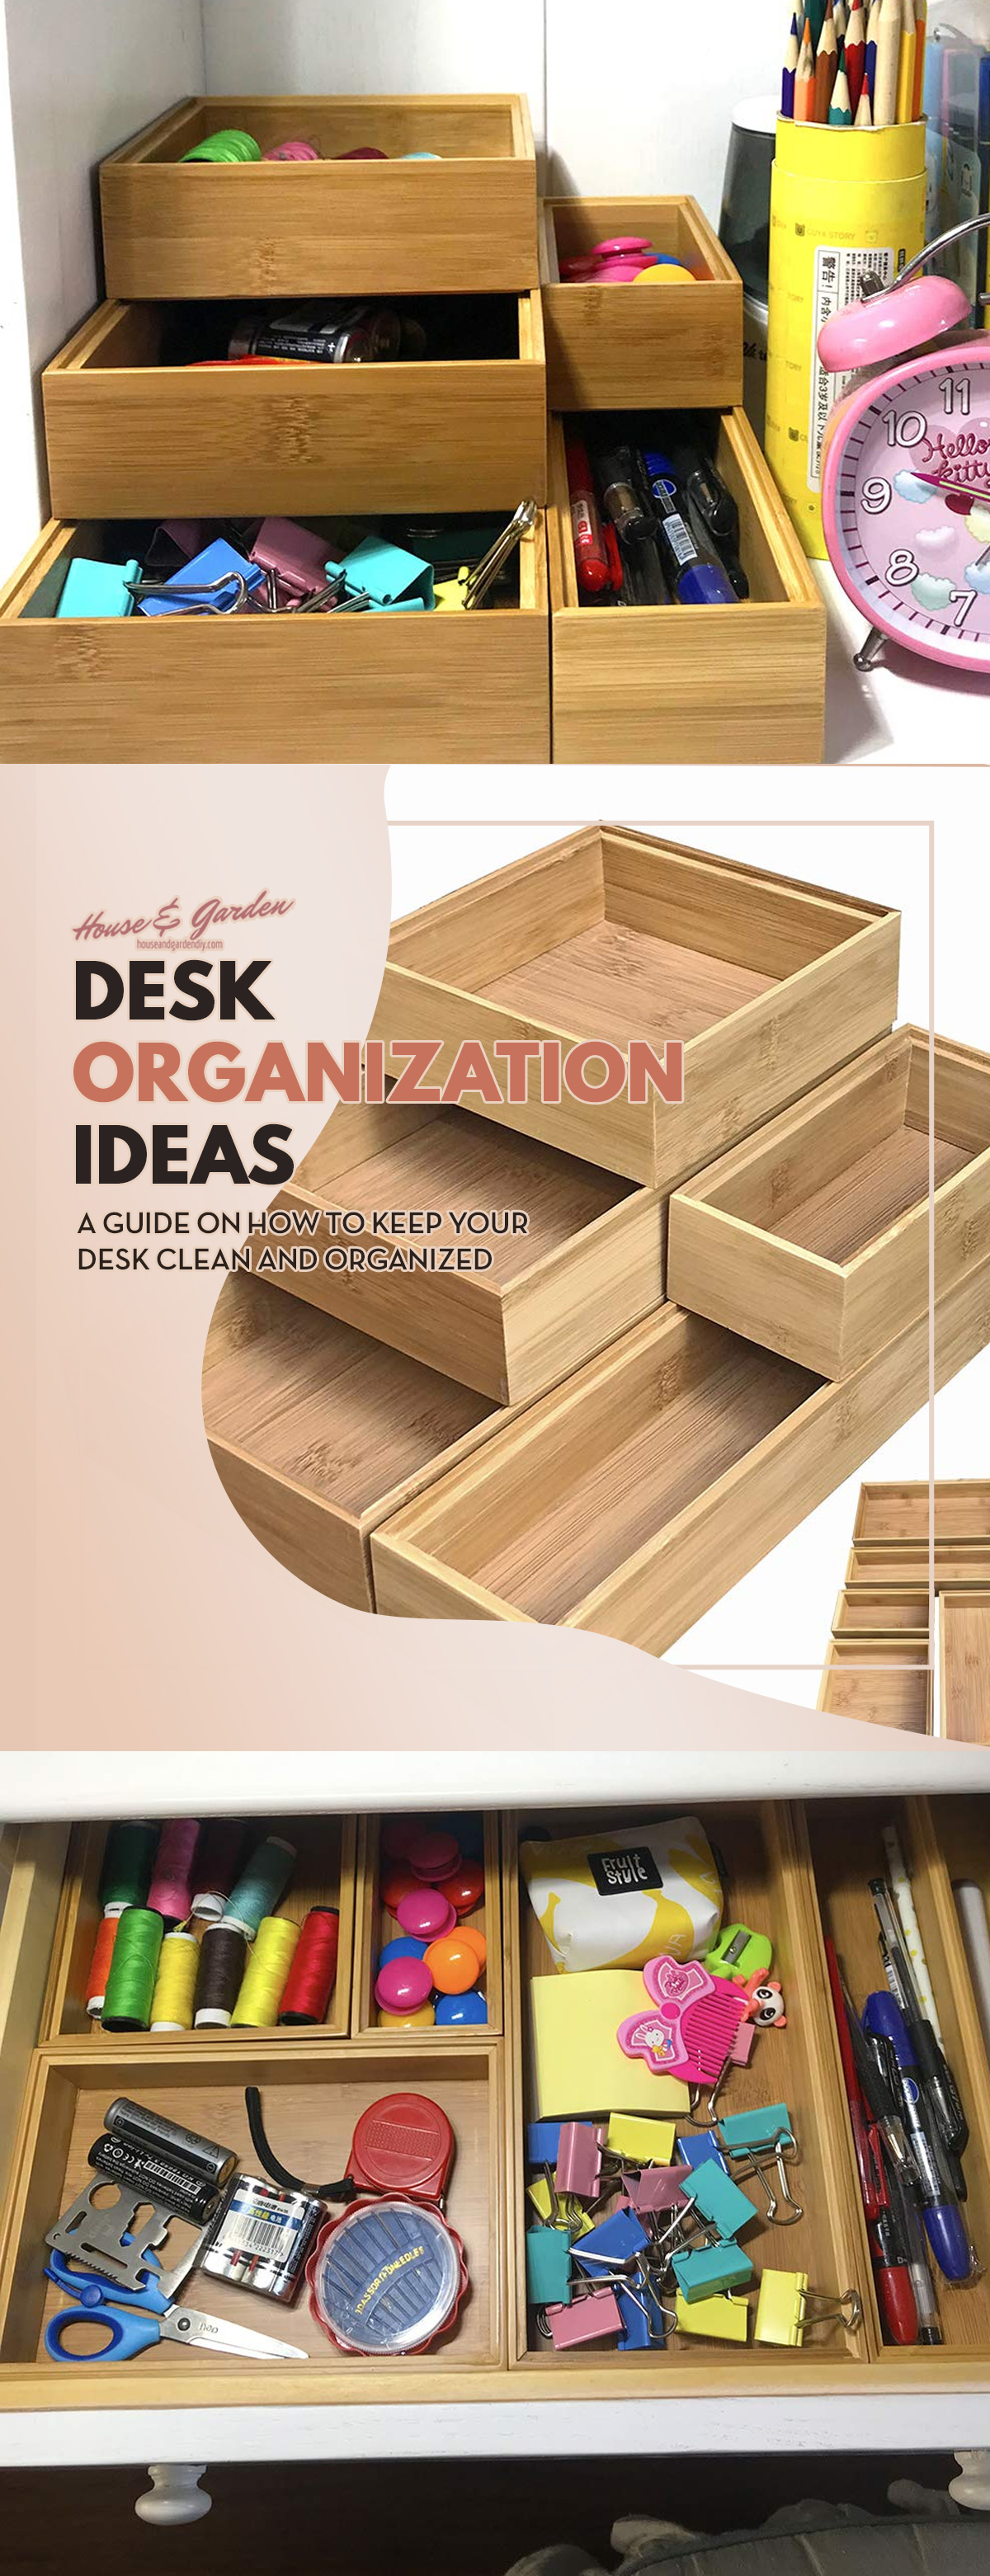 tips to organize your desk